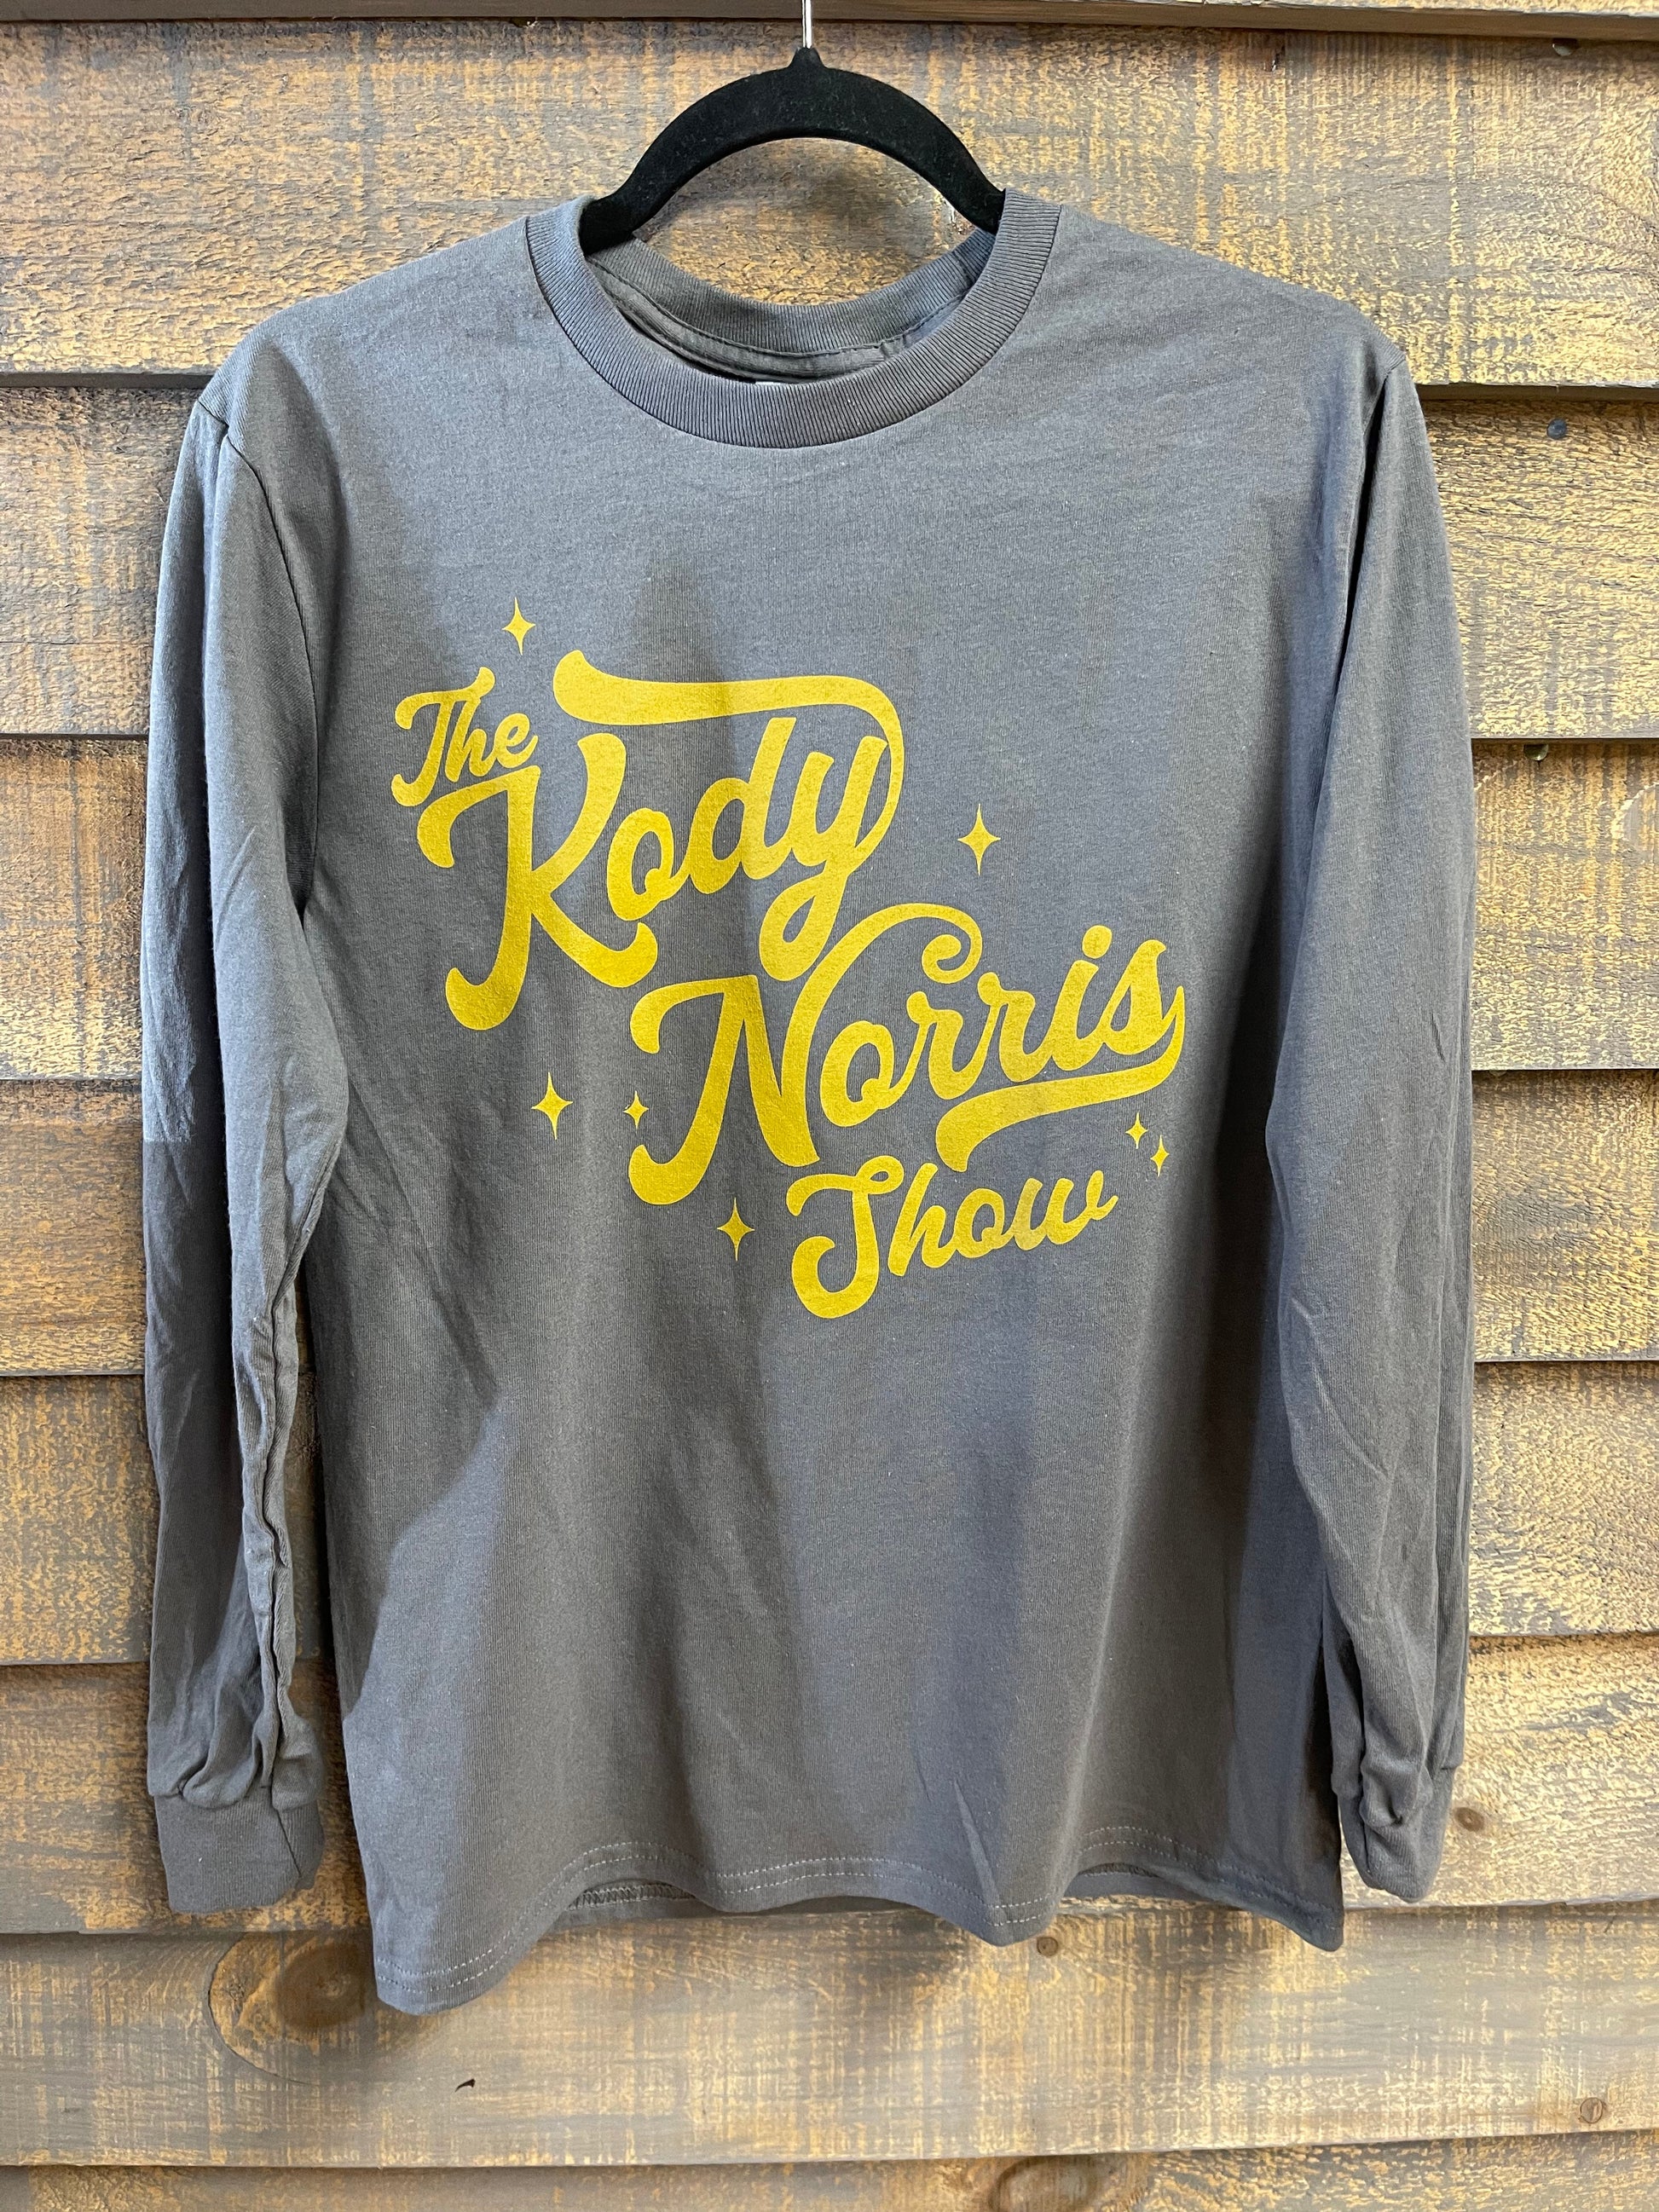 The Kody Norris Show Graphic Tee (Long Sleeve, Color Charcoal)  Charcoal with Gold Lettering.   Long Sleeve Gildan.